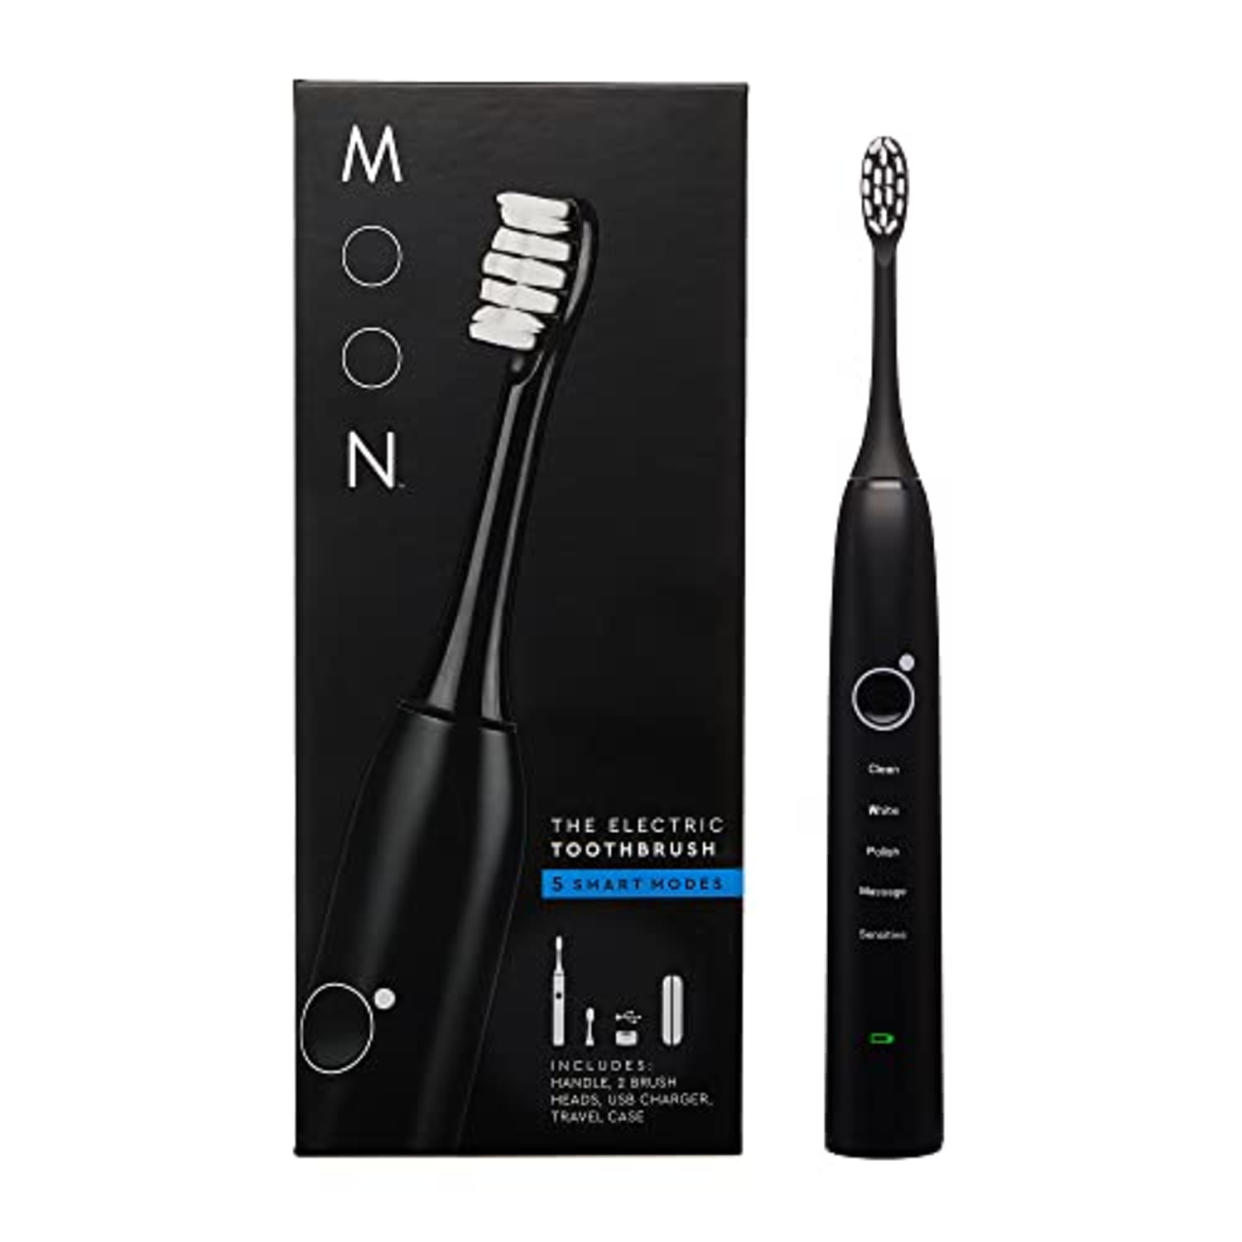 Moon Sonic Electric Toothbrush for Adults, 5 Smart Modes to Clean, Whiten, Massage and Polish Teeth, Rechargeable with Travel Case and 2 Toothbrush Heads, Black (AMAZON)